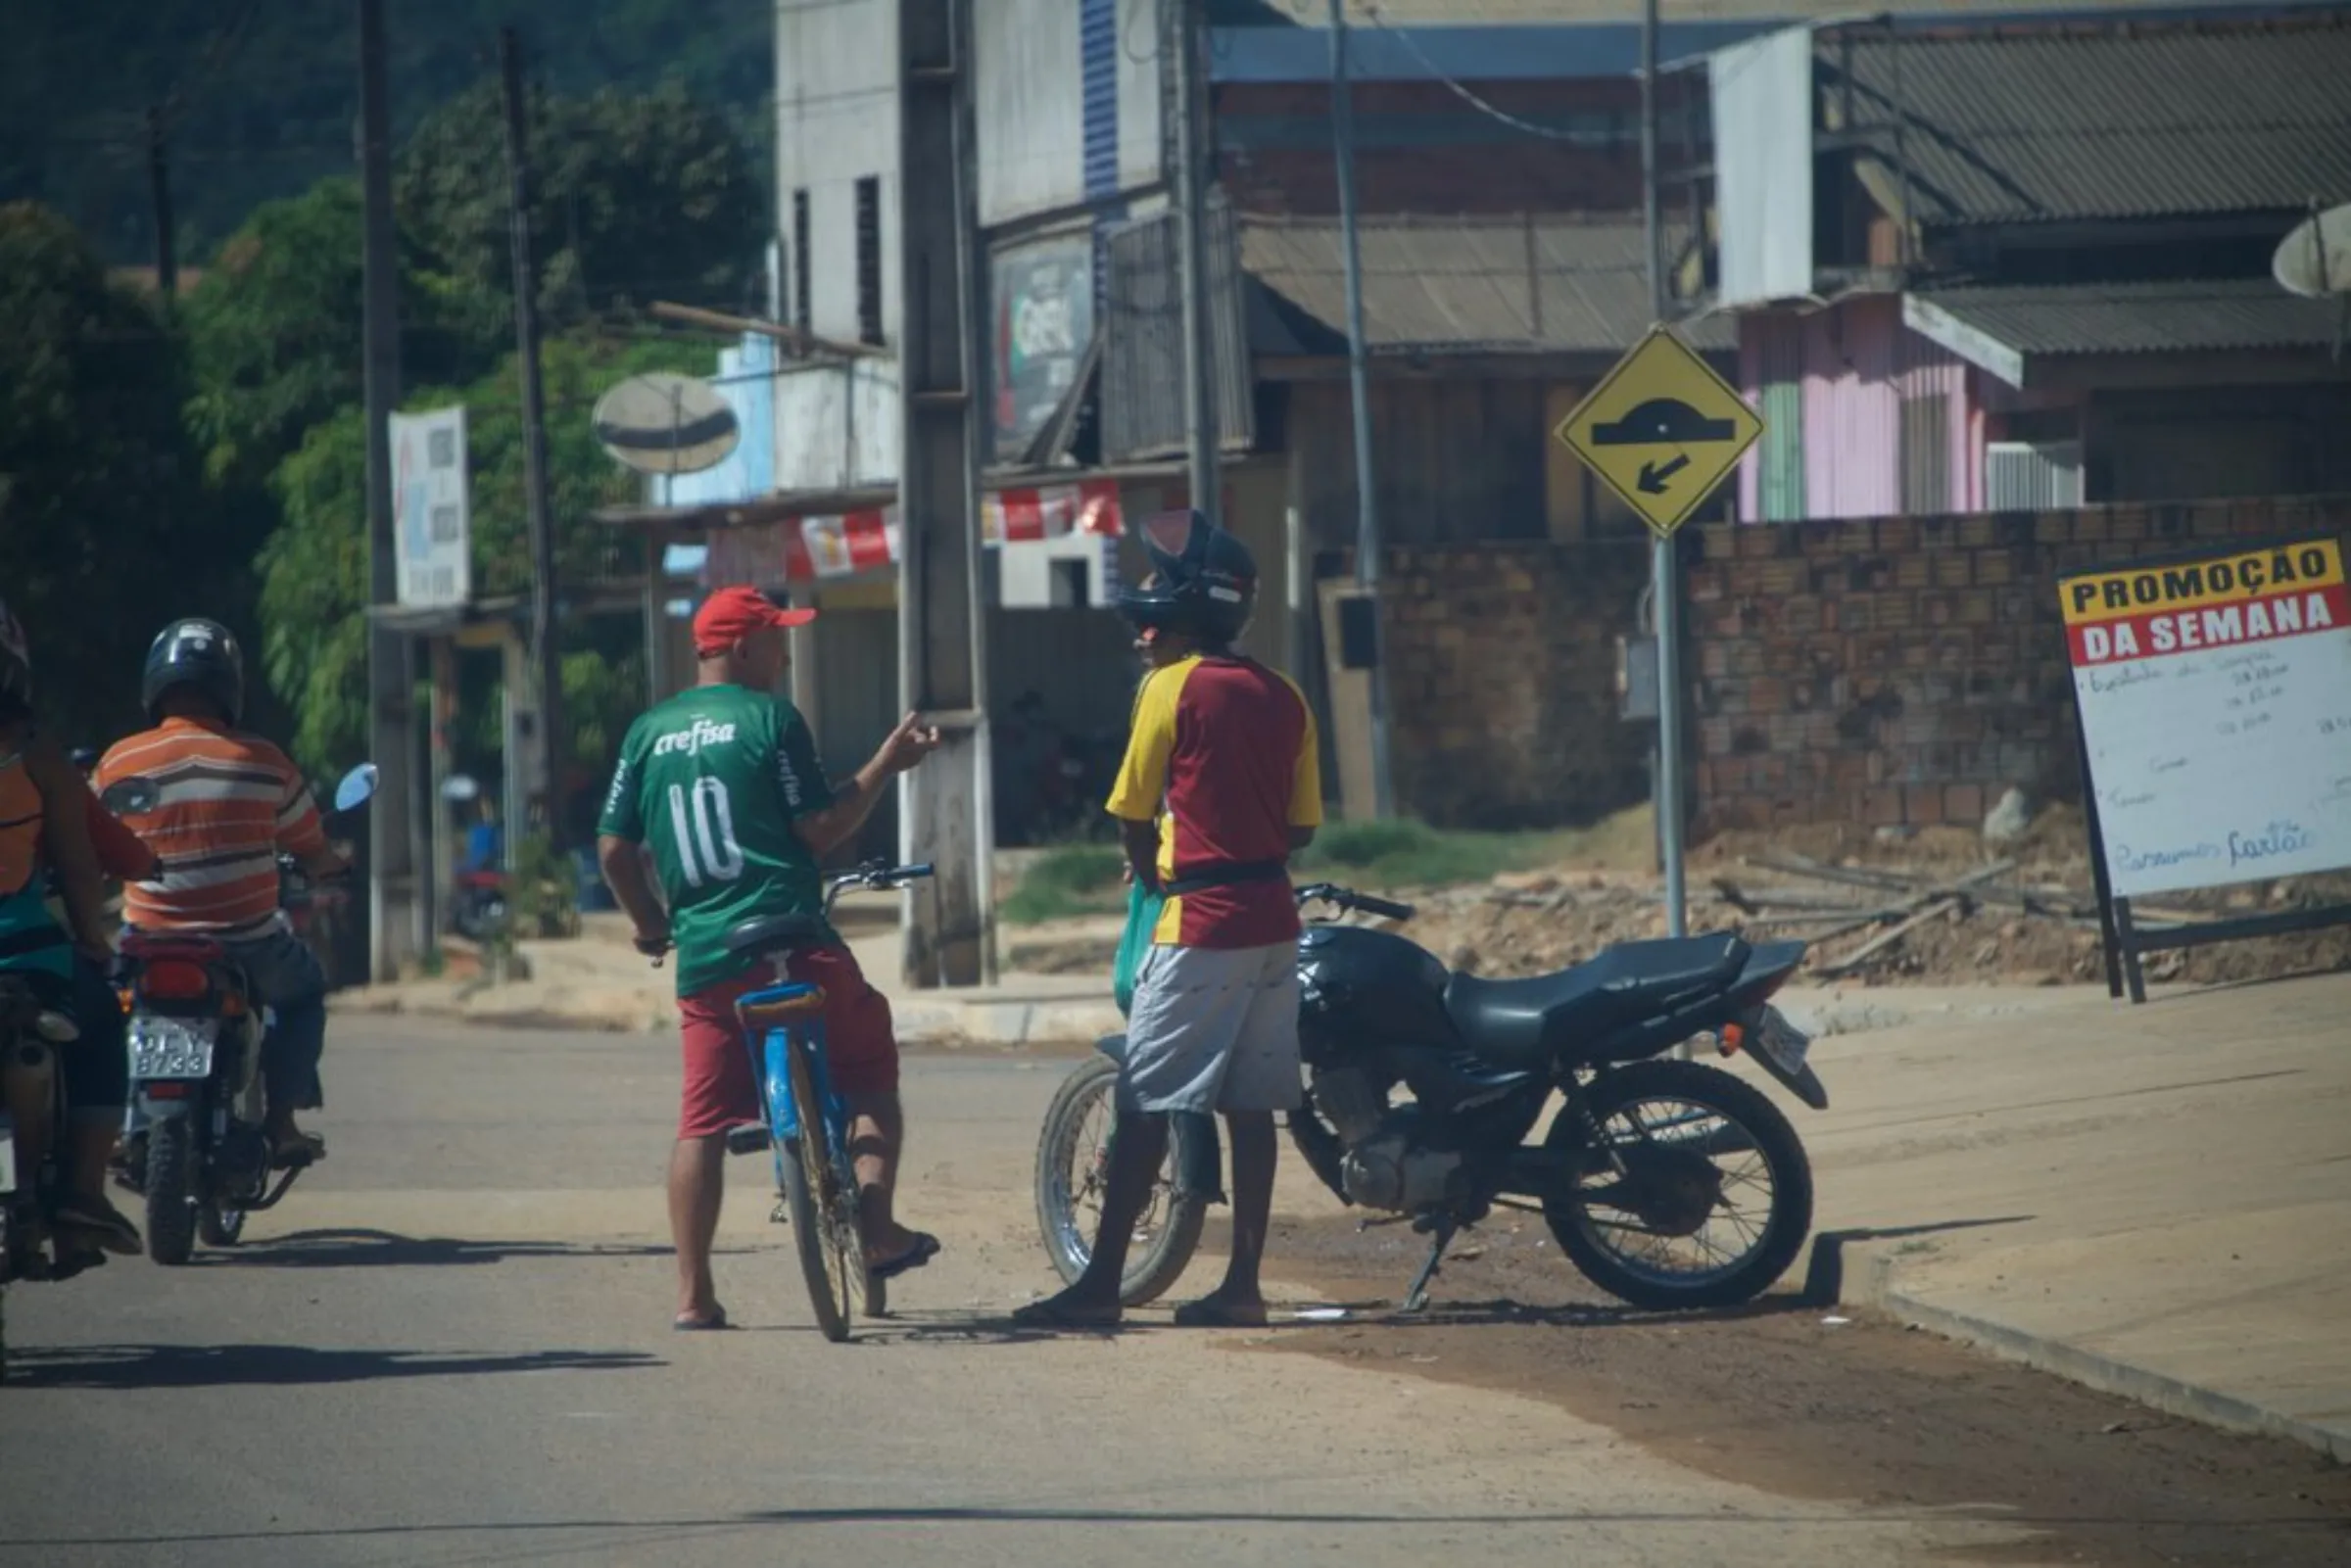 Locals talk in the street in Colniza, in the state of Mato Grosso, Brazil, May 31, 2022